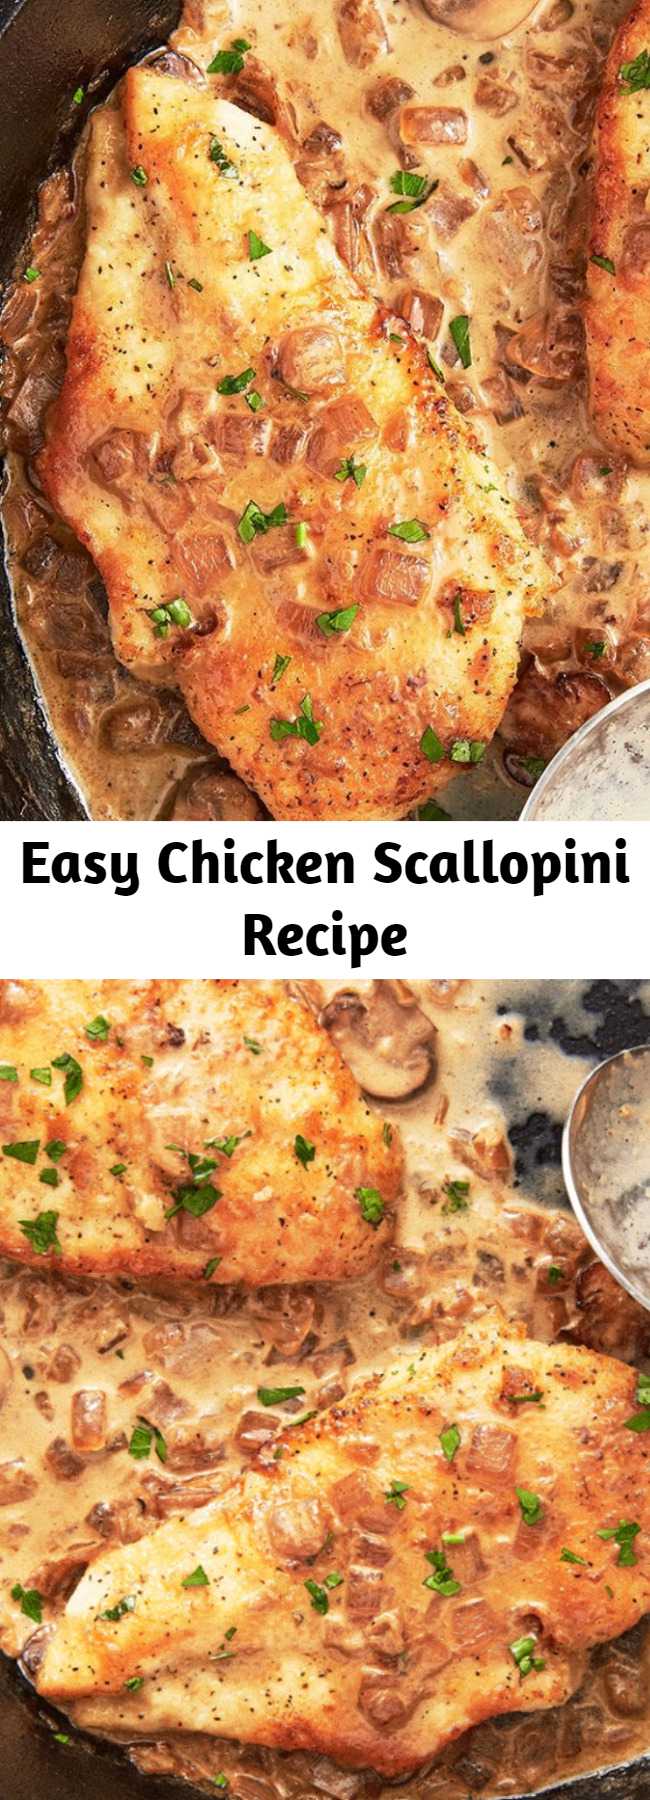 Easy Chicken Scallopini Recipe - This meal is the perfect combo for a weeknight meal: perfectly light but still hearty. #easy #chicken #scallopini #sauce #mushrooms #recipes #lemon #best #creamy